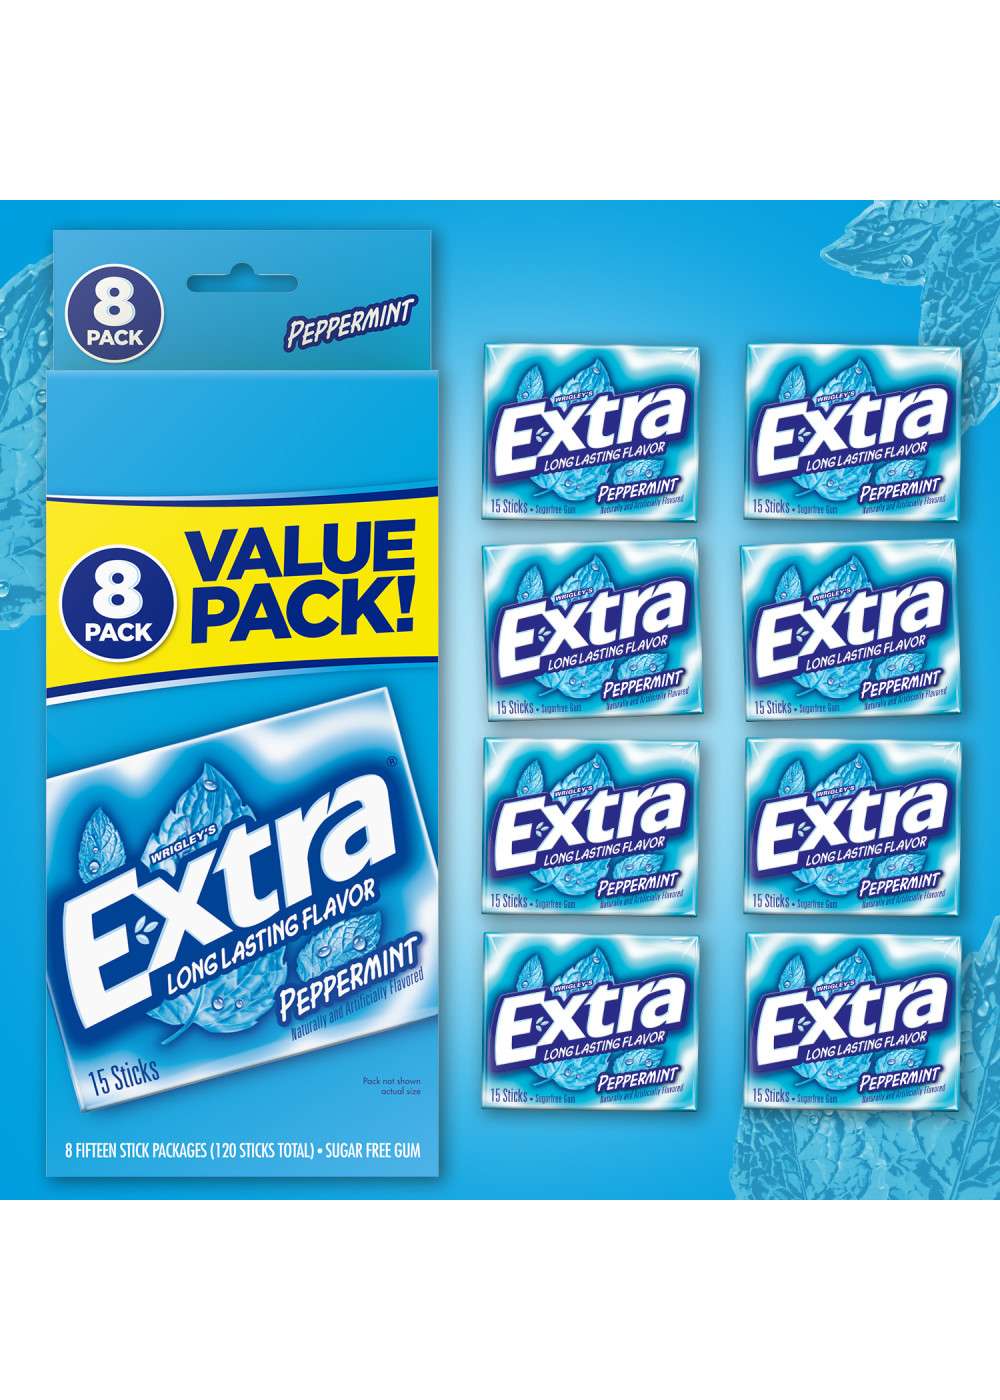 Extra Sugarfree Gum Value Pack - Peppermint, 8 Pk; image 5 of 7